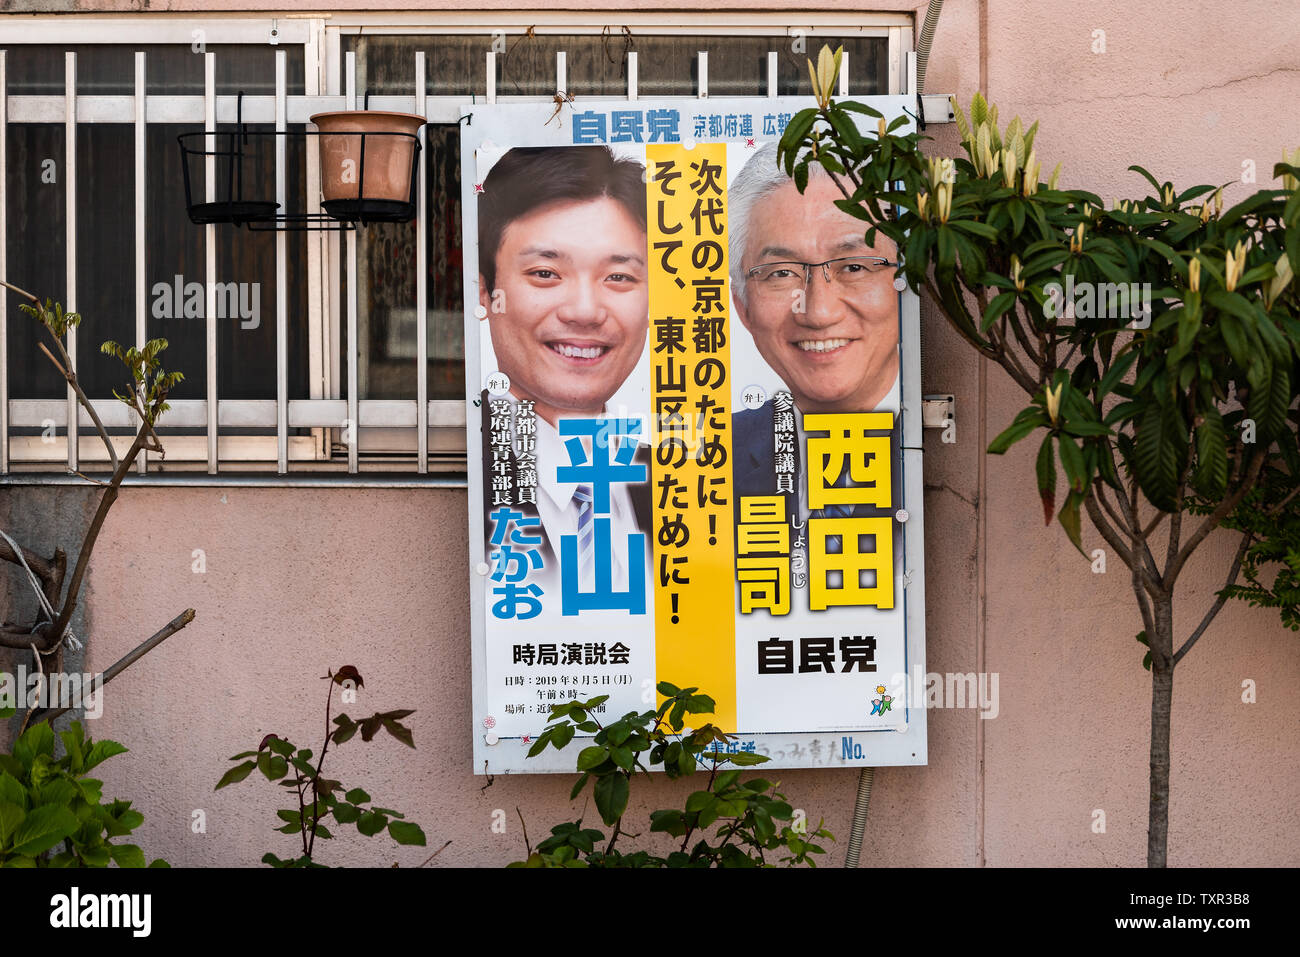 Kyoto, Japan - April 14, 2019: Election campaign sign on street by house building wall poster in Japanese and two candidates Stock Photo